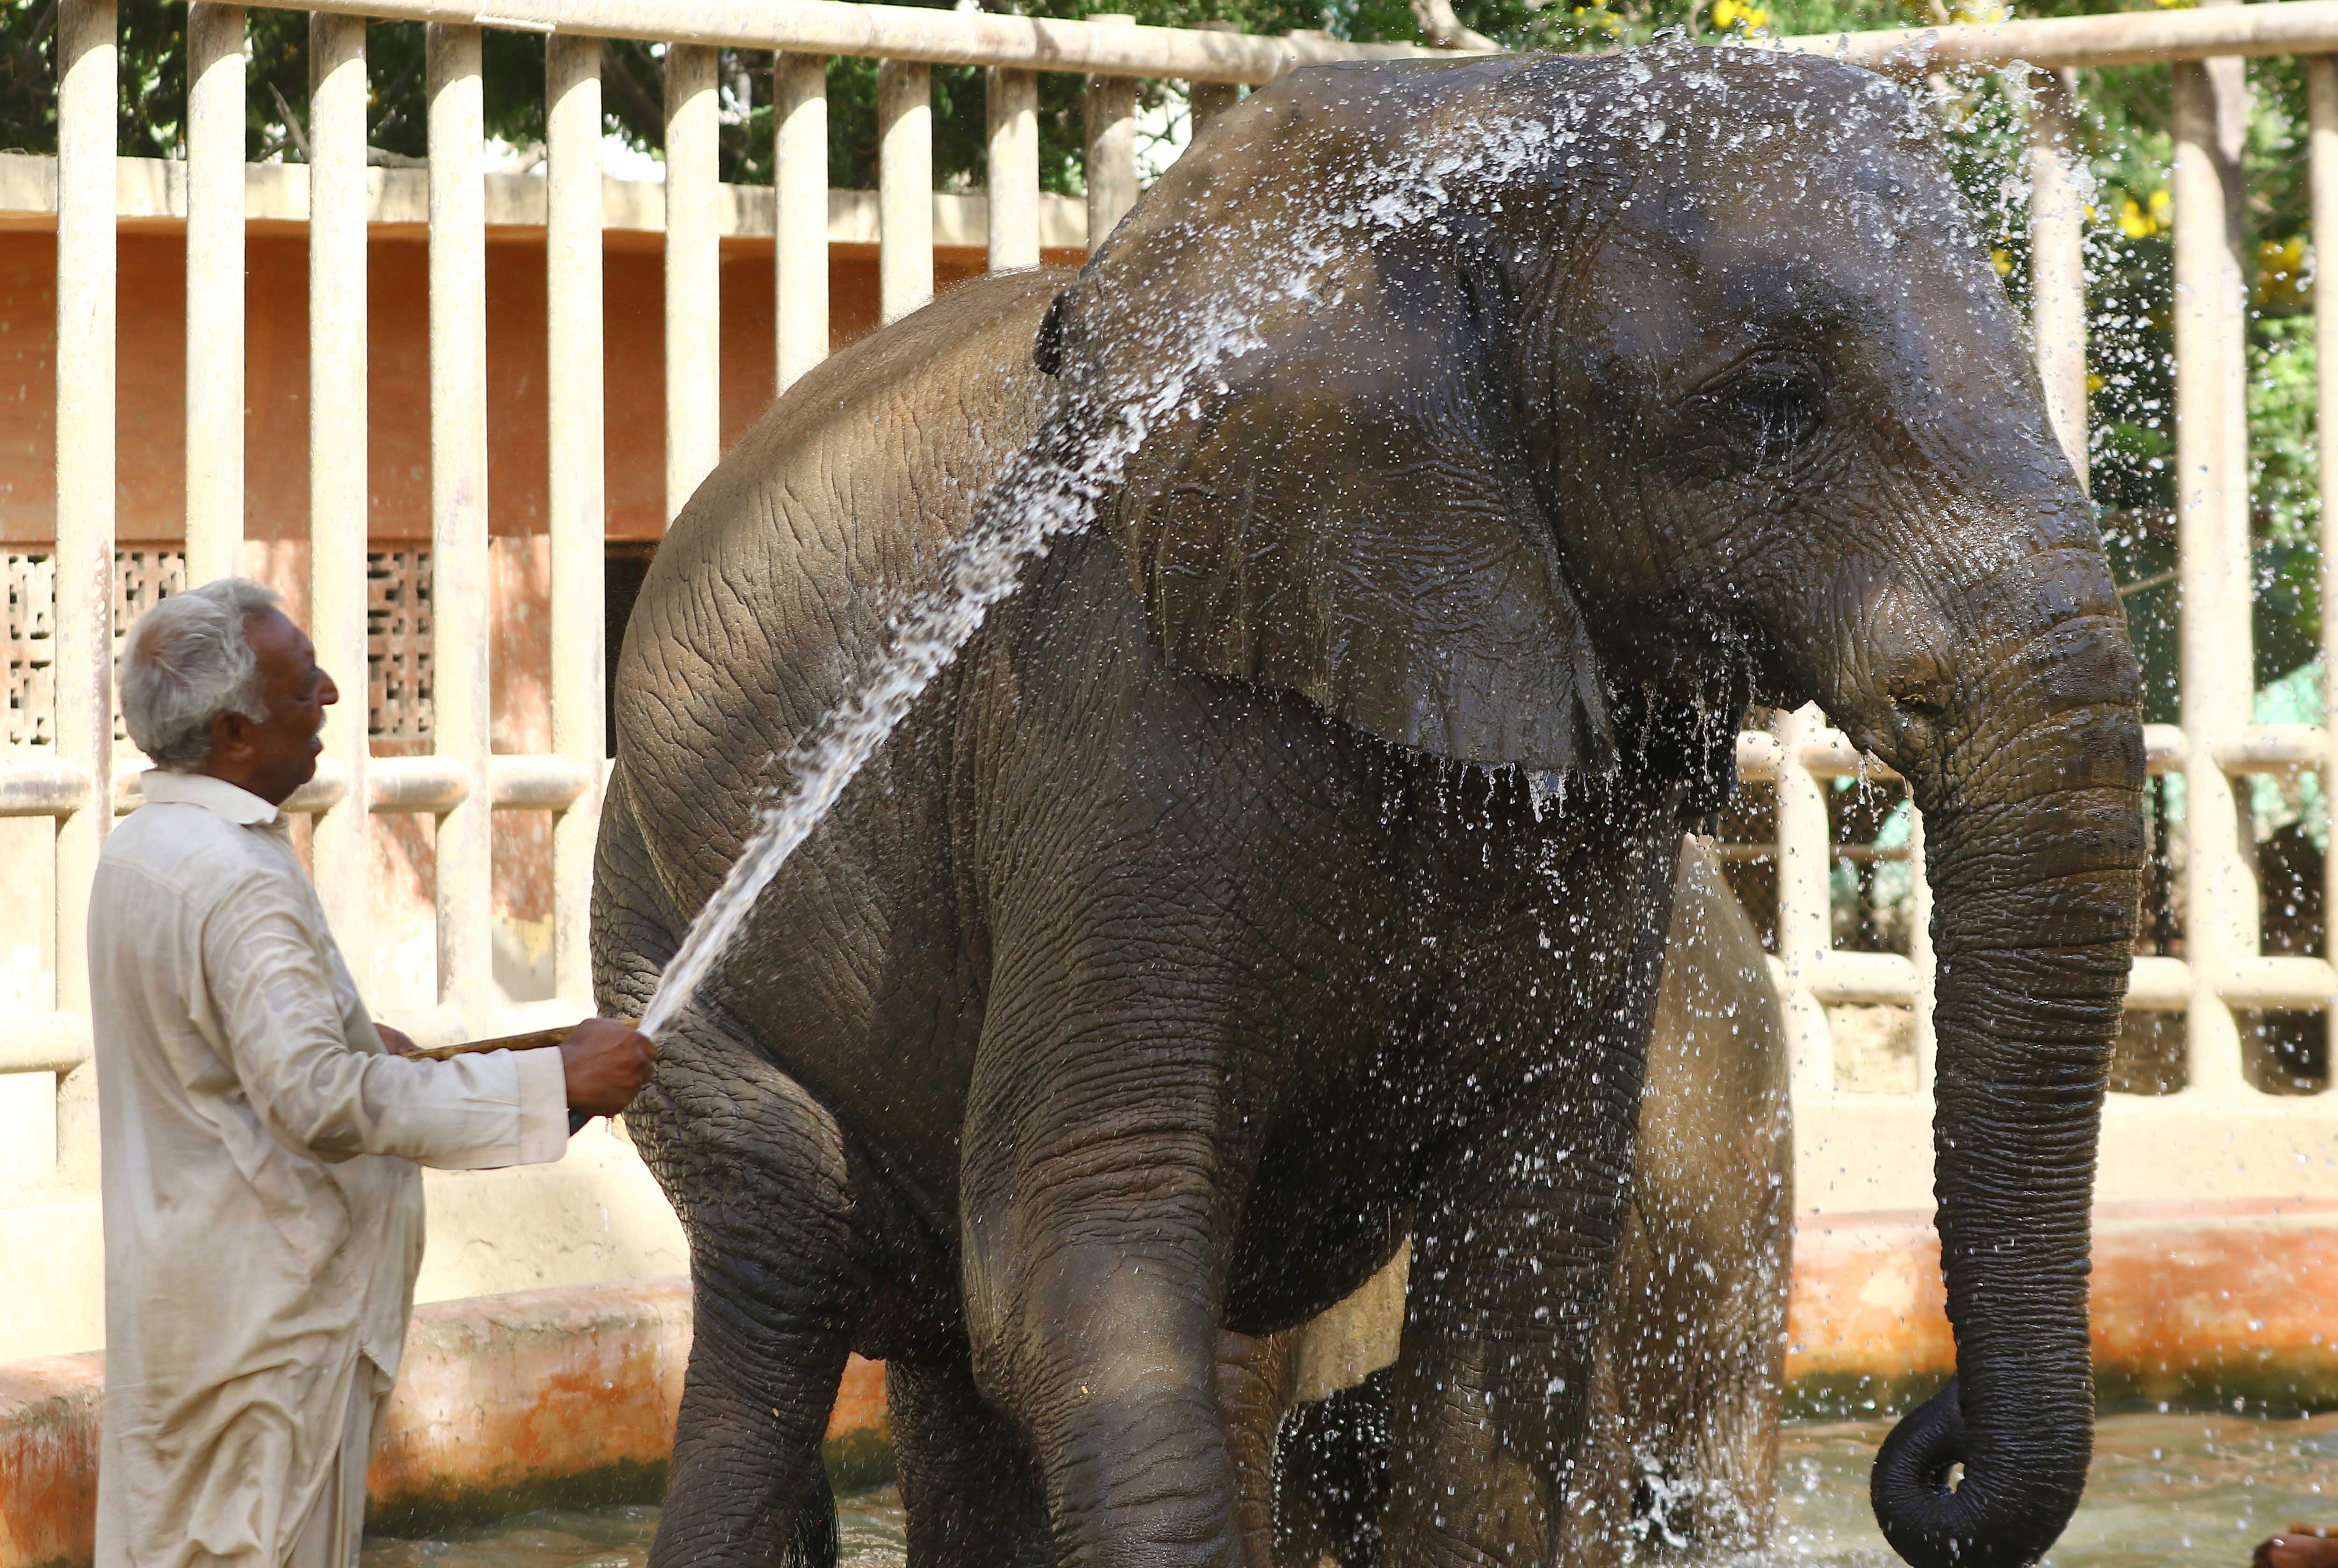 An elephant cools off at a zoo in Karachi, Pakistan, on Friday